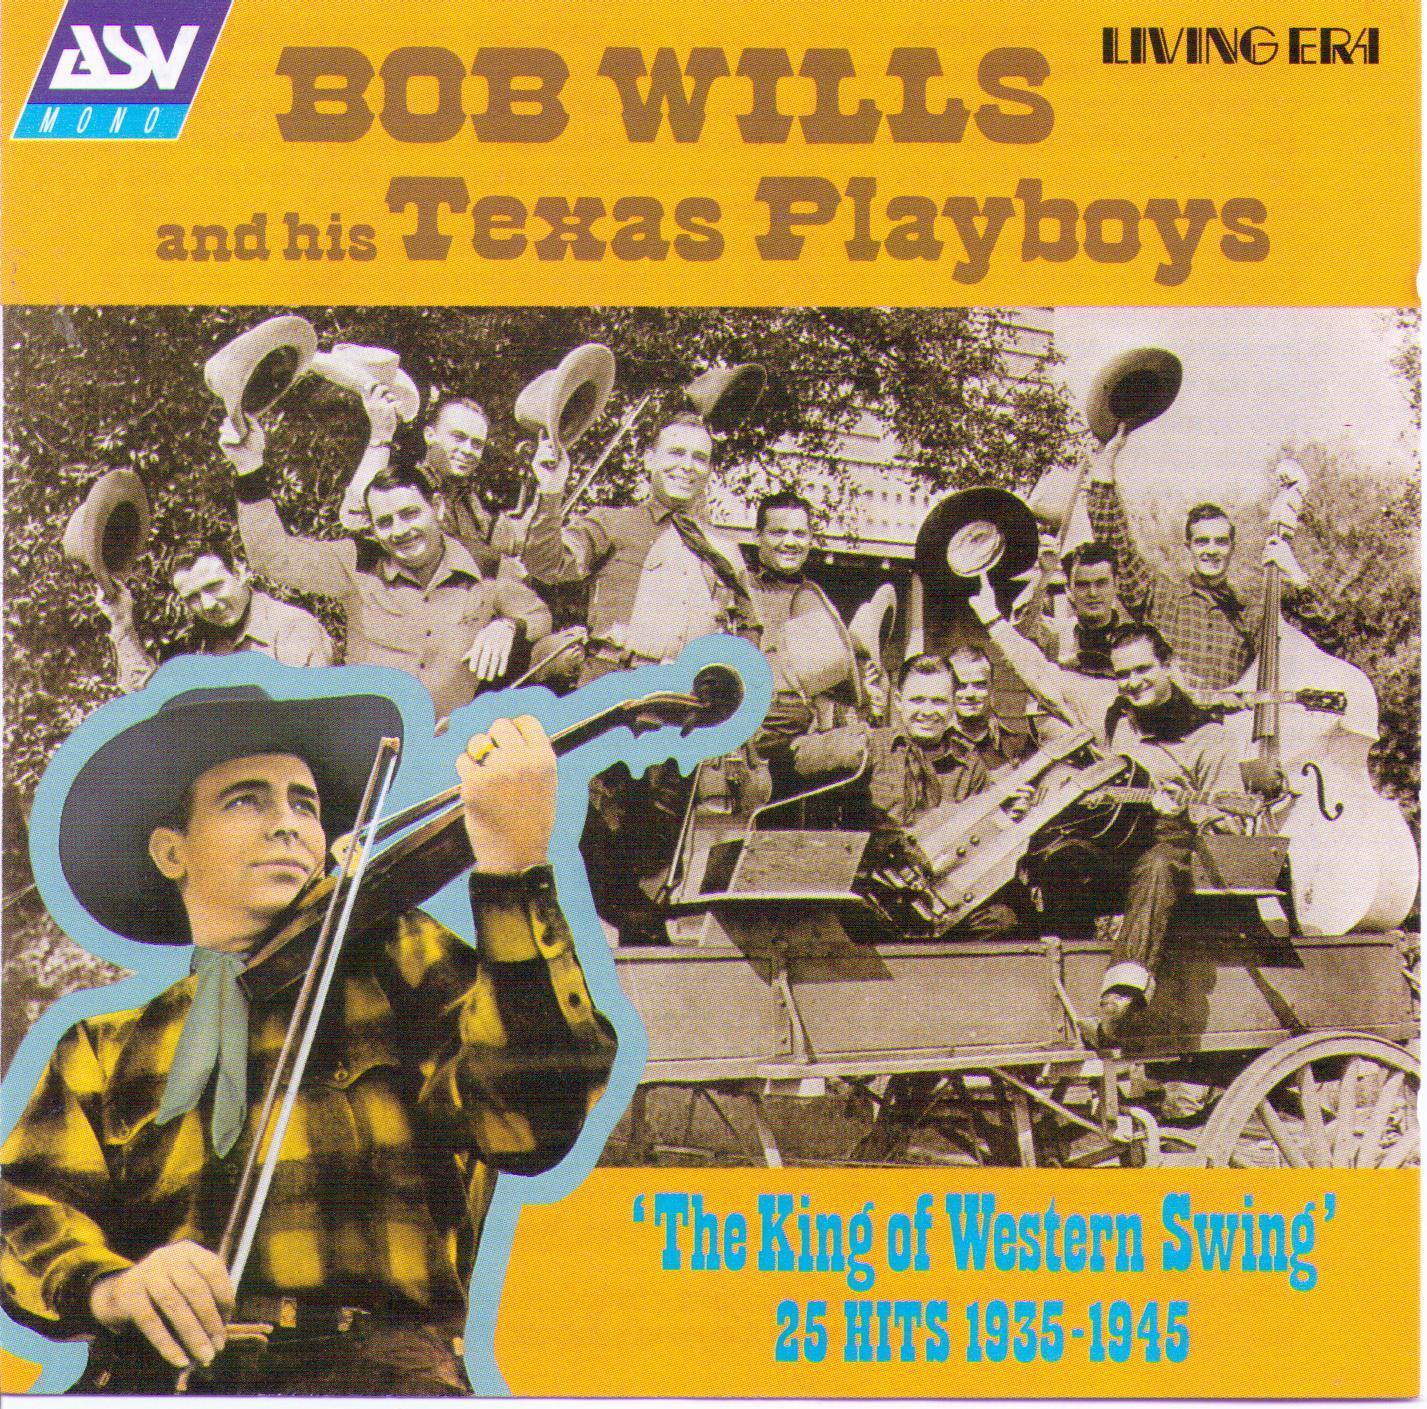 Album cover of Bob Wills and his Texas Playboys 